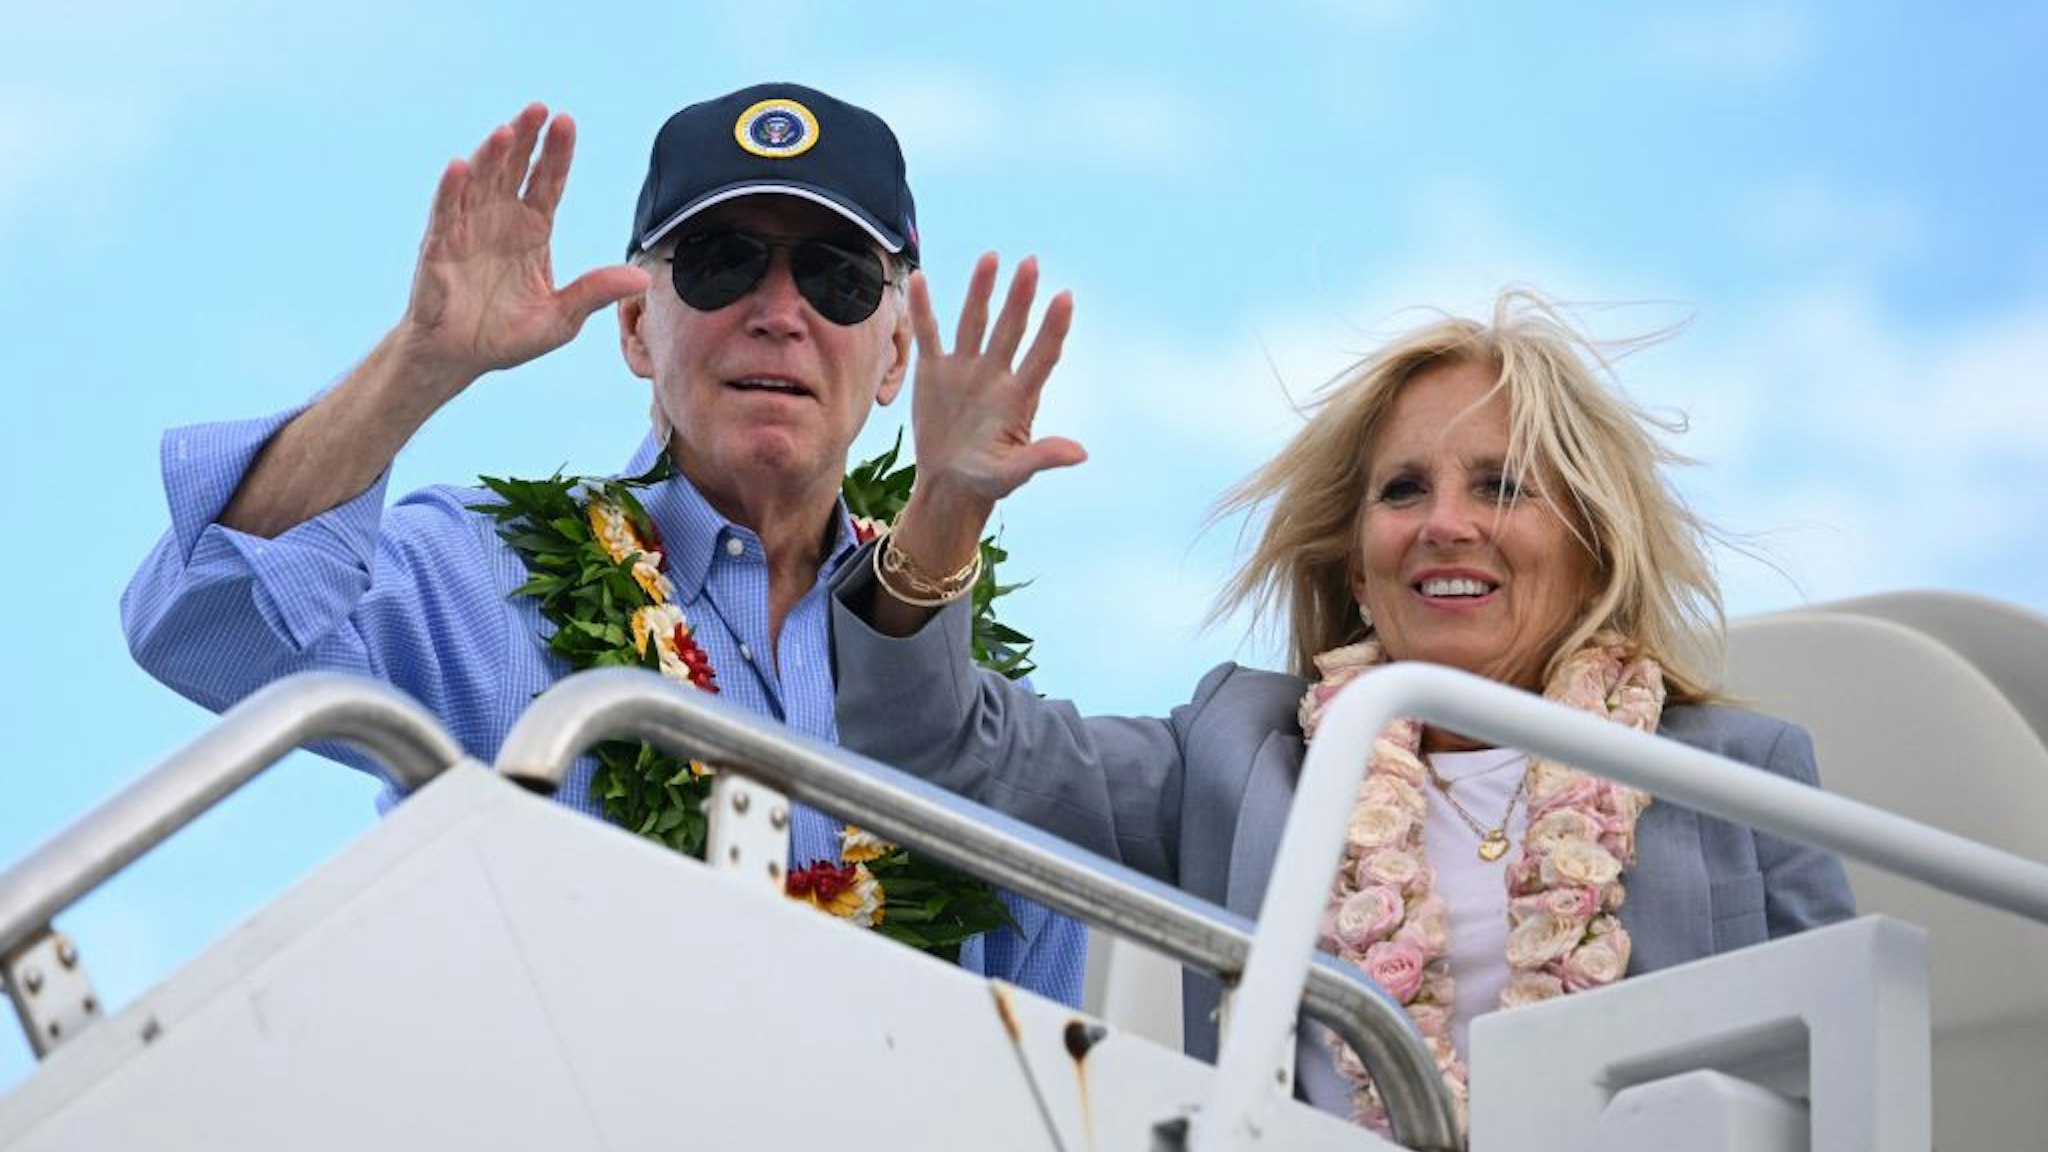 US President Joe Biden and US First Lady Jill Biden wear Hawaiian leis as they wave from Air Force One before departing Kahului Airport in Kahului, Hawaii, on August 21, 2023. The Bidens spent the day meeting with first responders, survivors, and local officials following deadly wildfires in Maui. (Photo by Mandel NGAN / AFP)